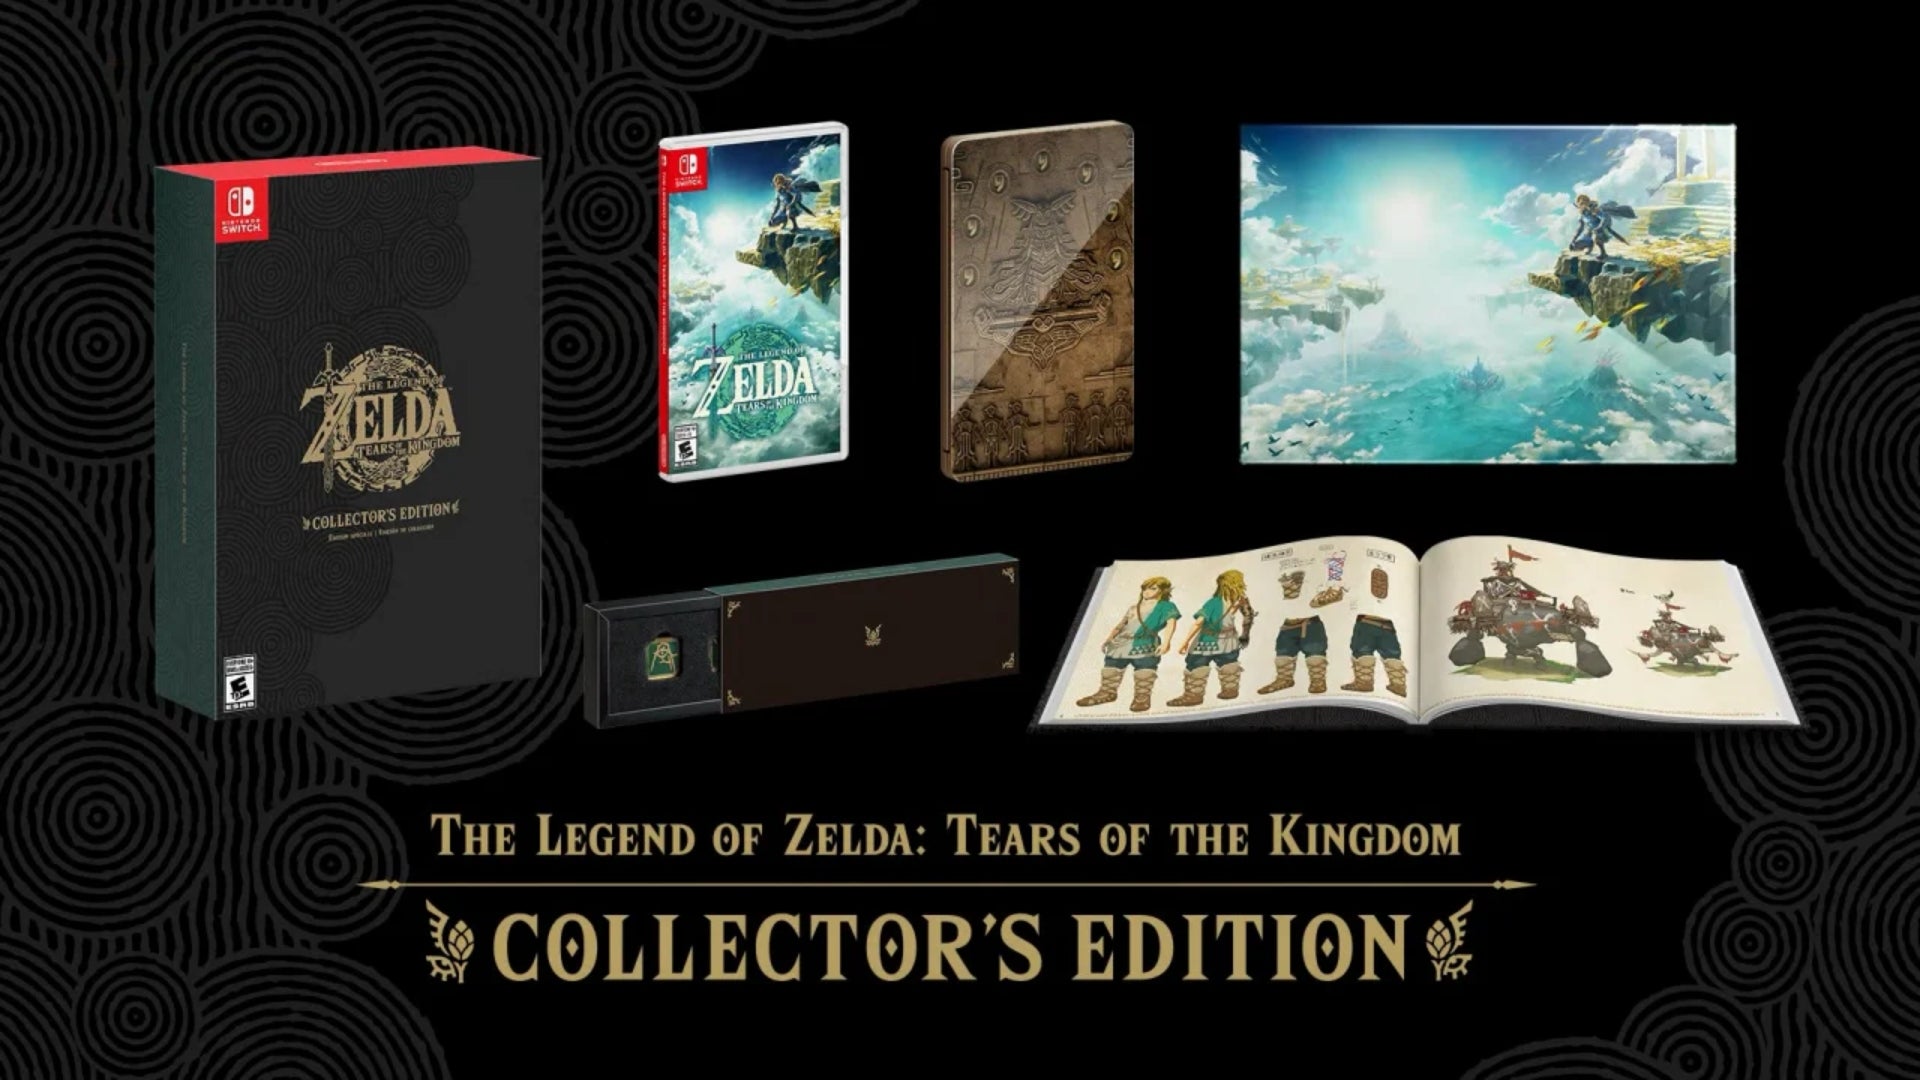 Image for The Legend of Zelda: Tears of the Kingdom - Special Edition is up for pre-order on Very